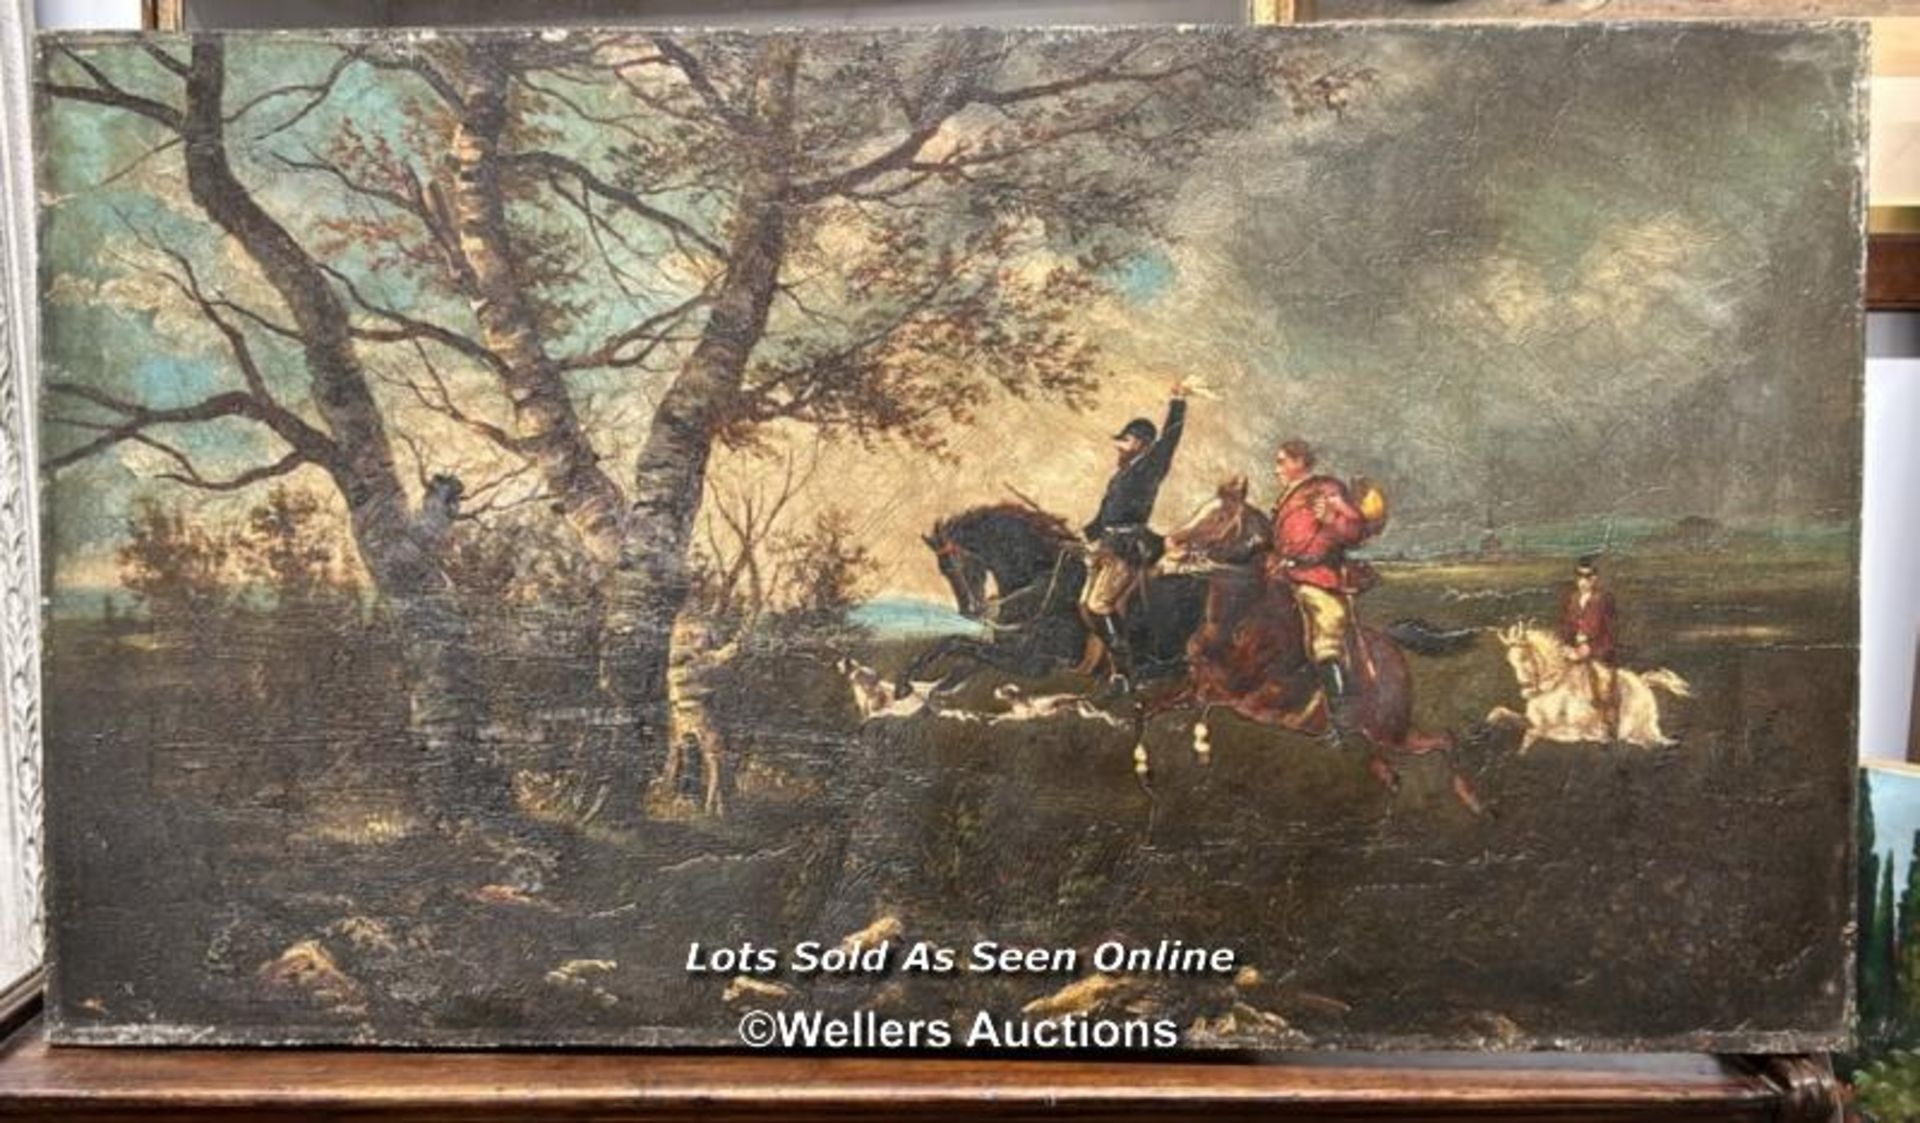 OIL PAINTING DEPICTING A HUNTING SCENE